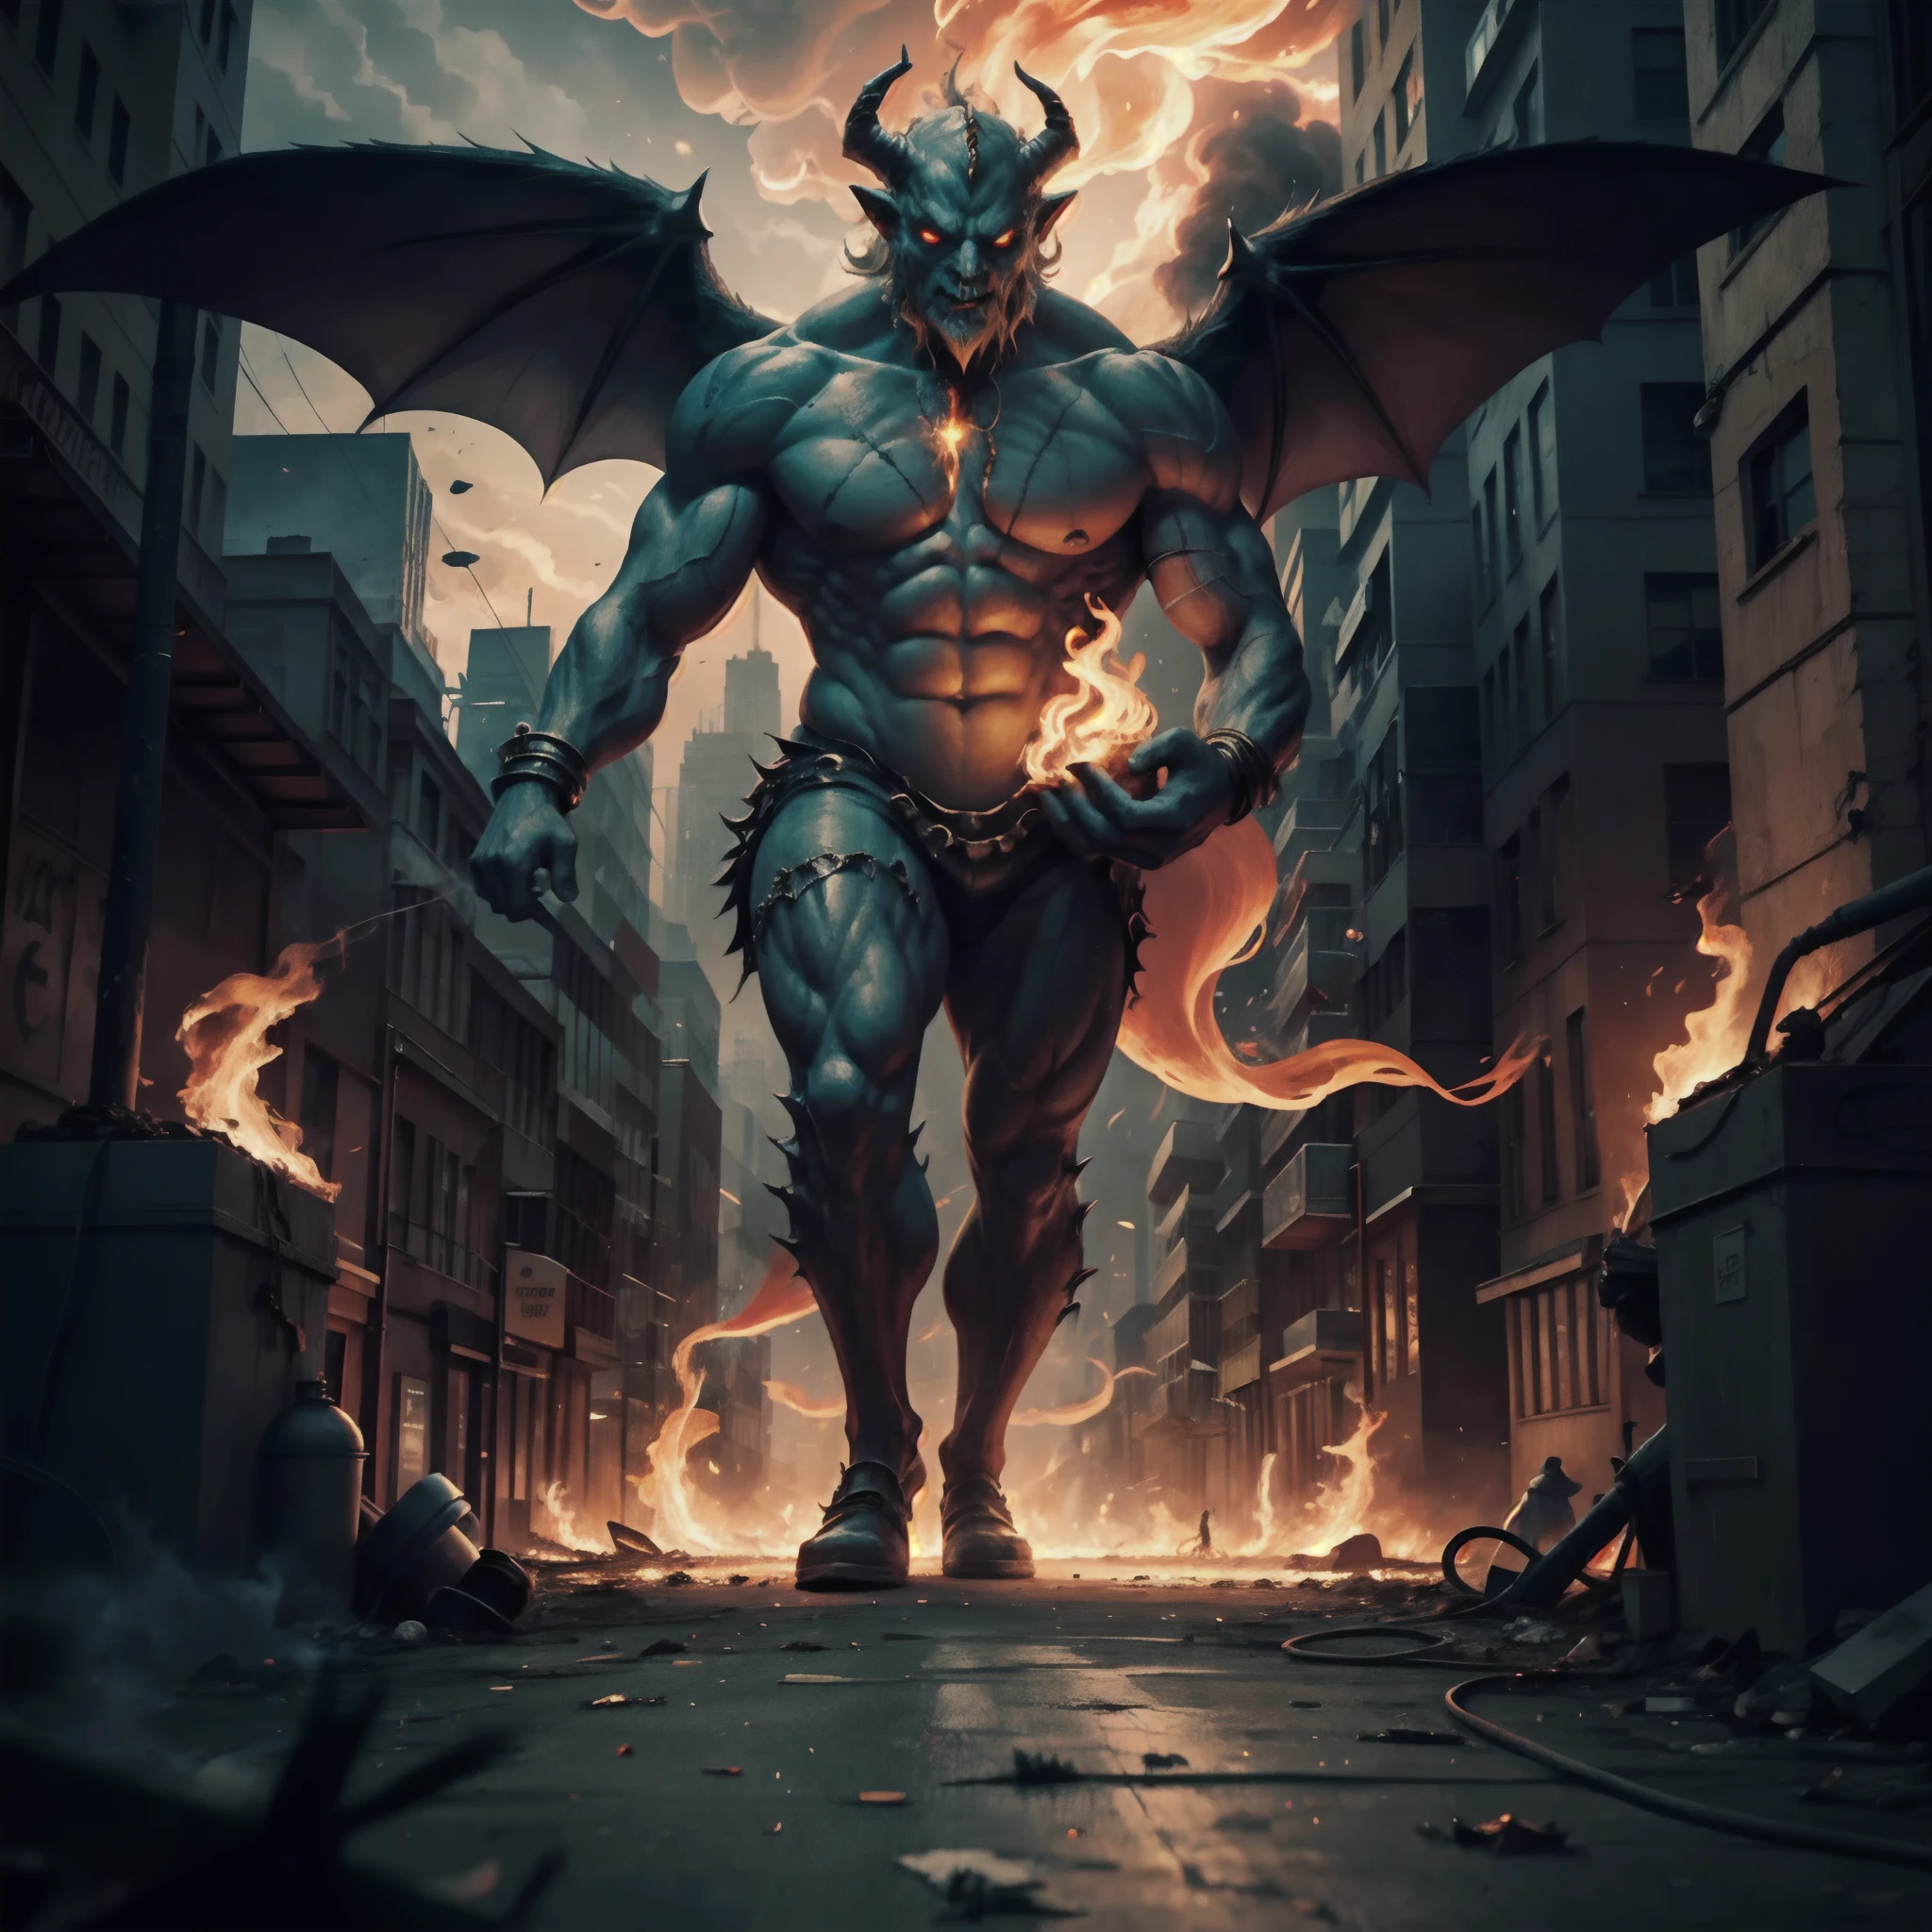 breathtaking, from the point of view of a  holding their mother's hand, city street, a gigantic and terrifying demonic deity made from smoke and fire and pollutiob, ground level, digital art